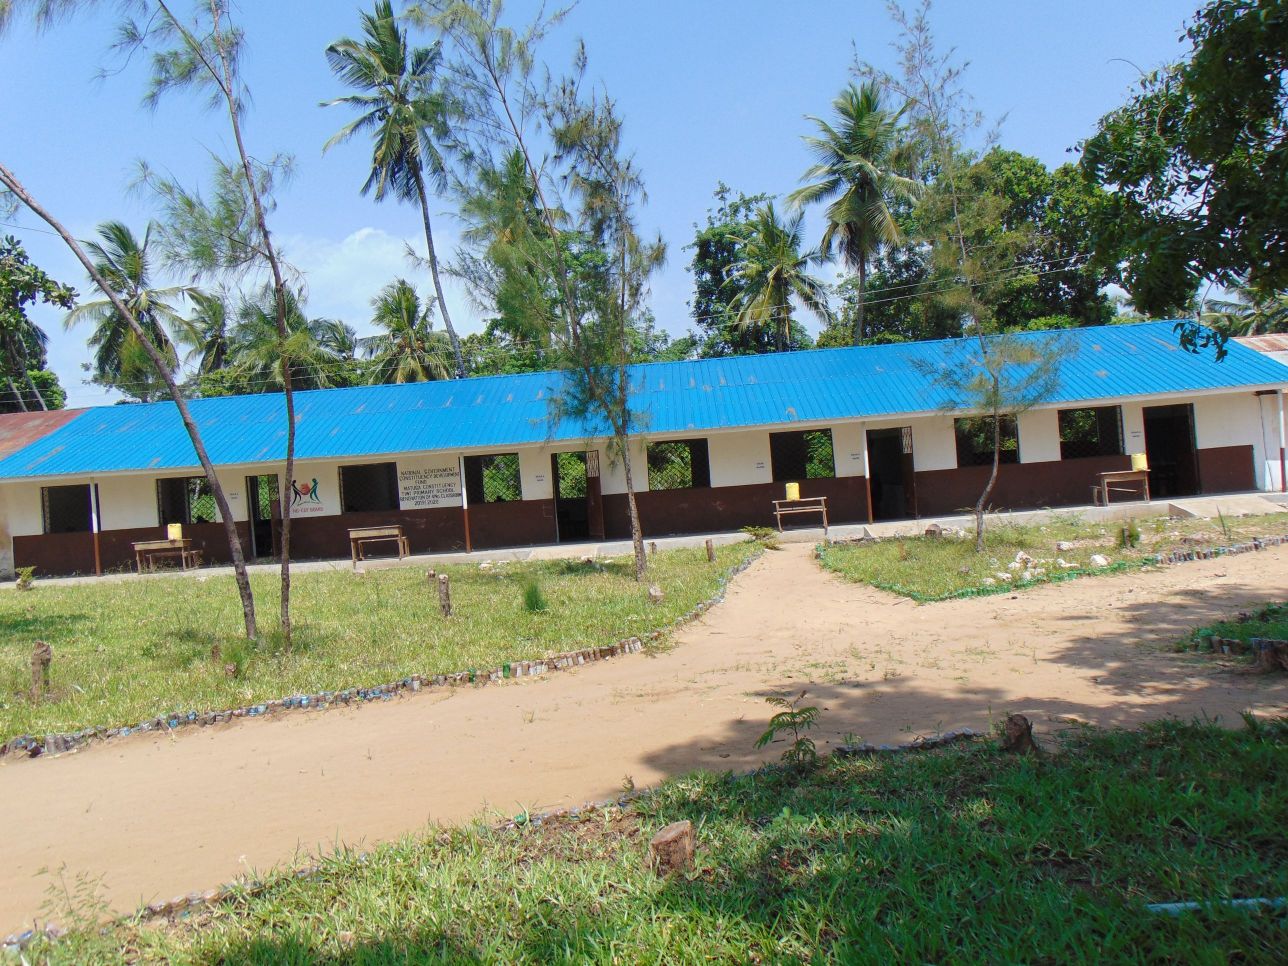 Renovation of 4 clasroom at Tiwi Primary School